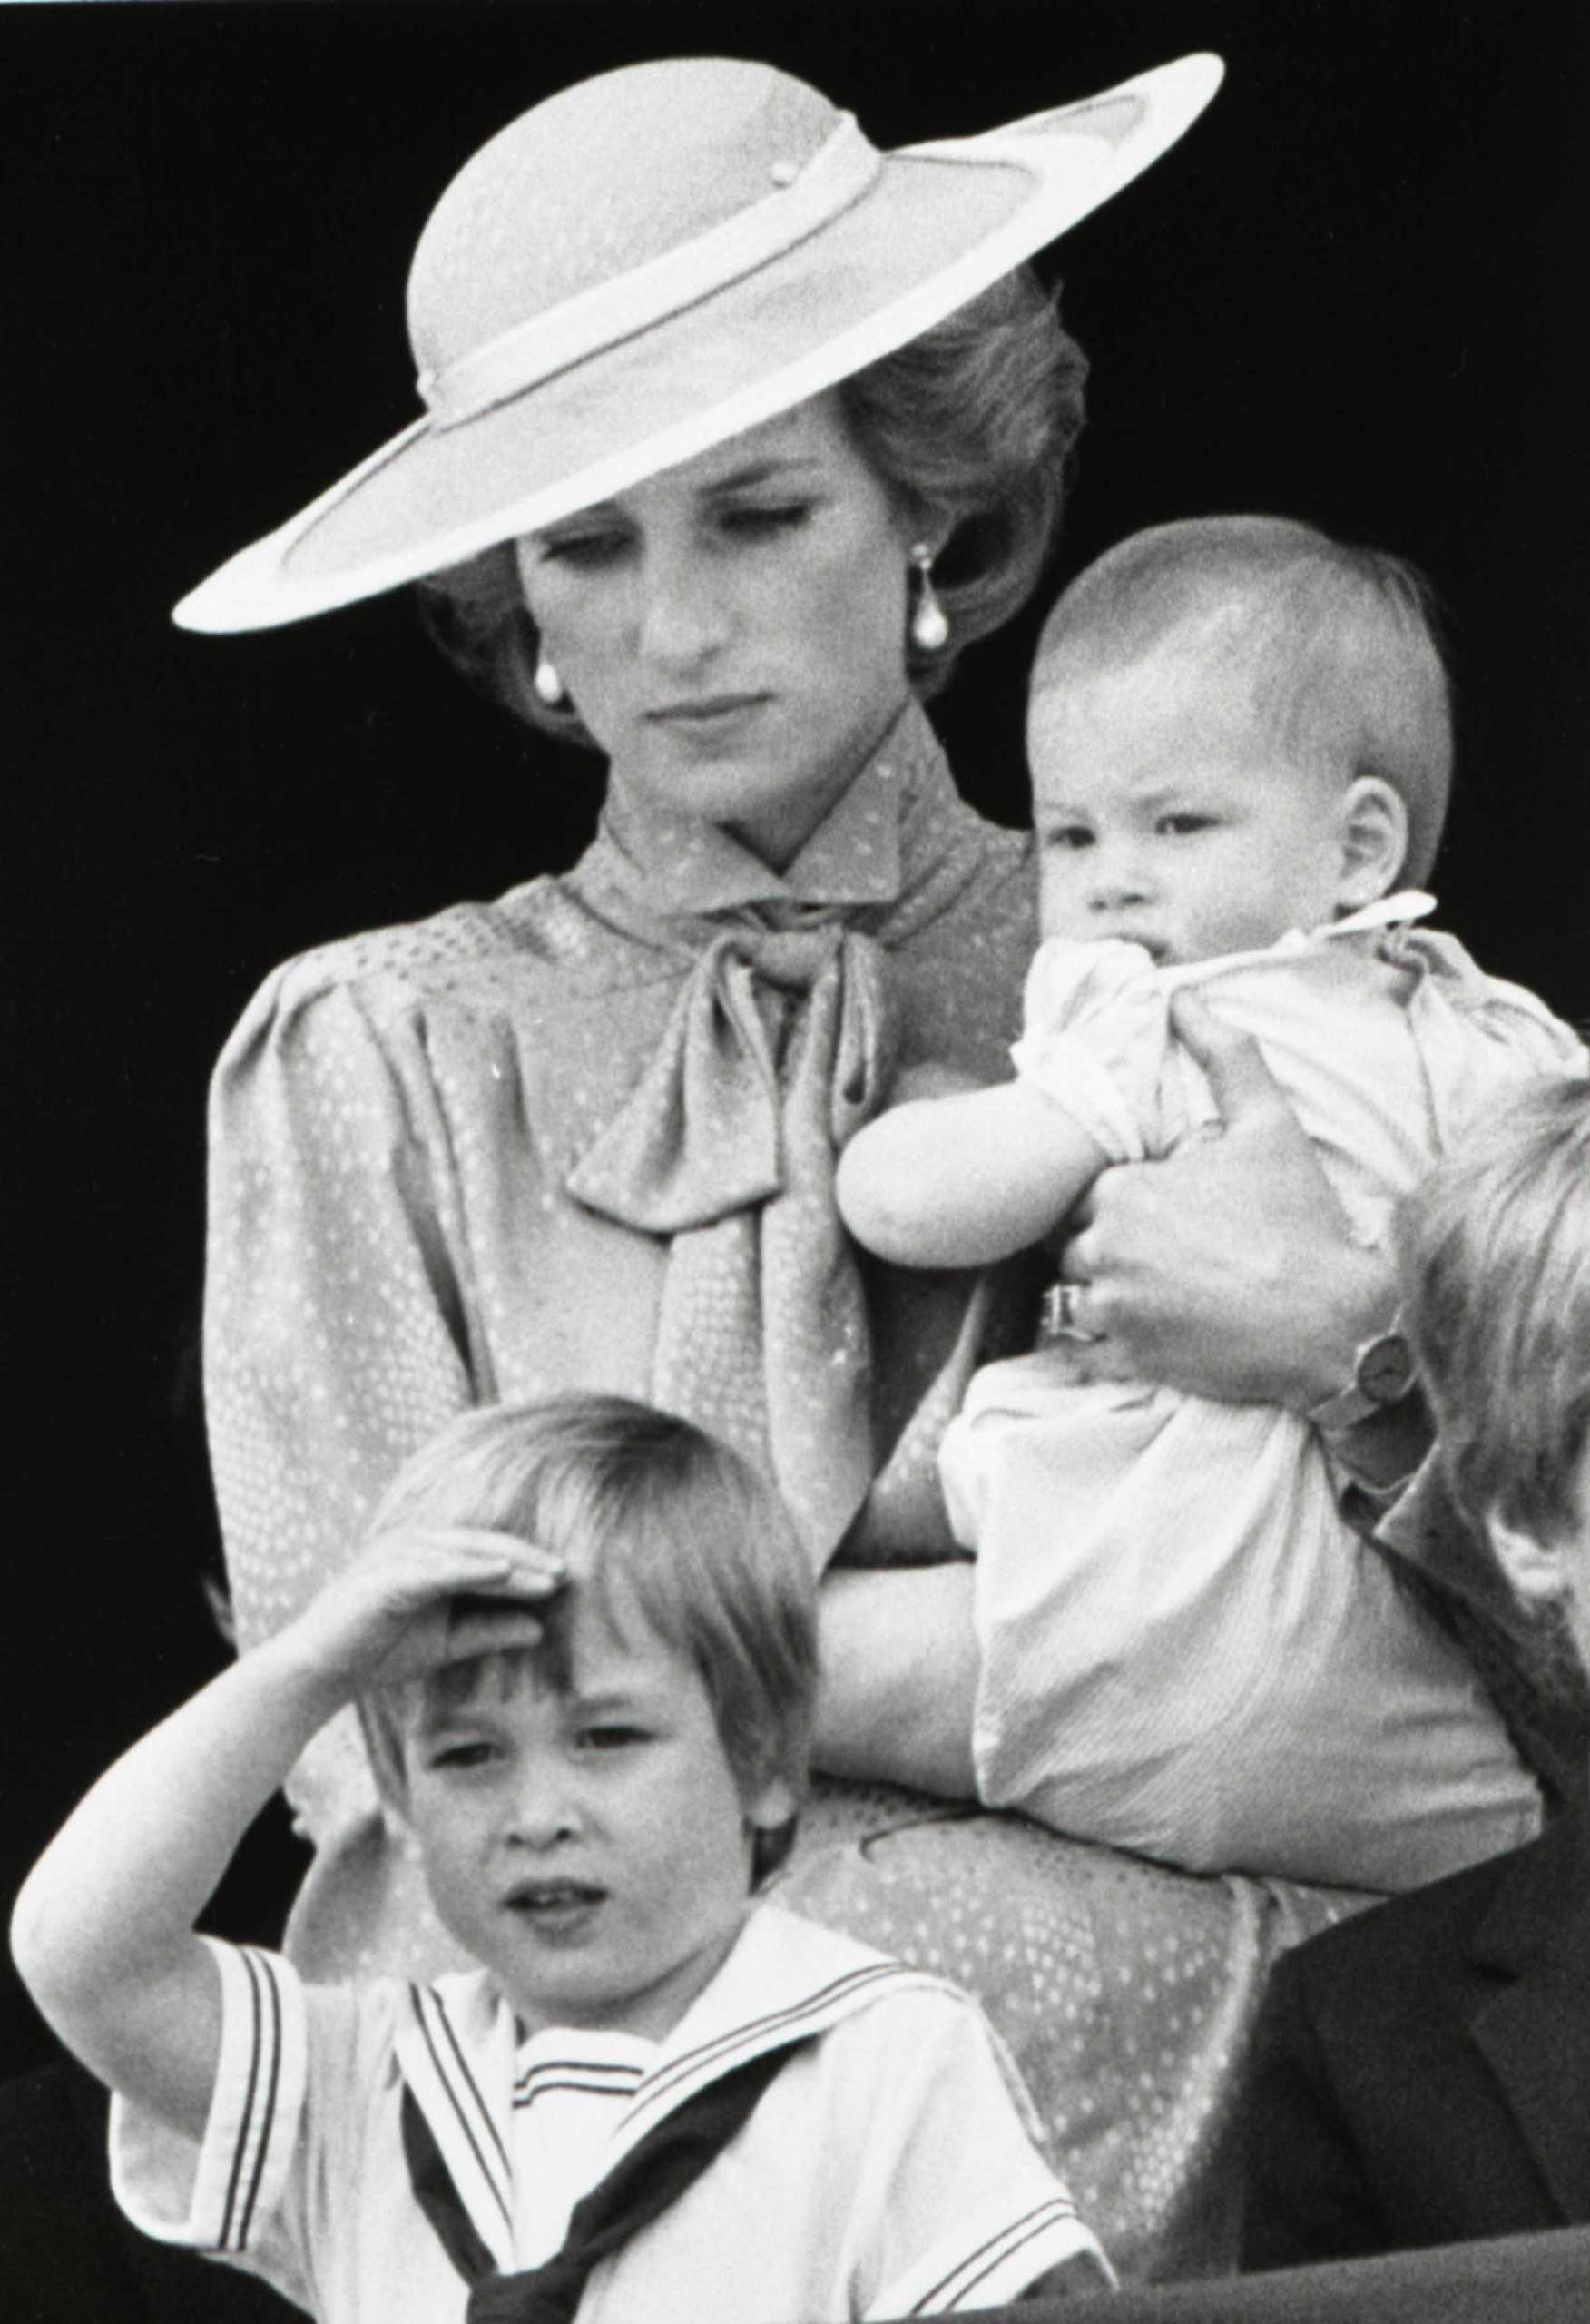 Prince Harry, aged 9 months, watches a military parade with his mother Diana, Princess of Wales, and brother William, in 1985.